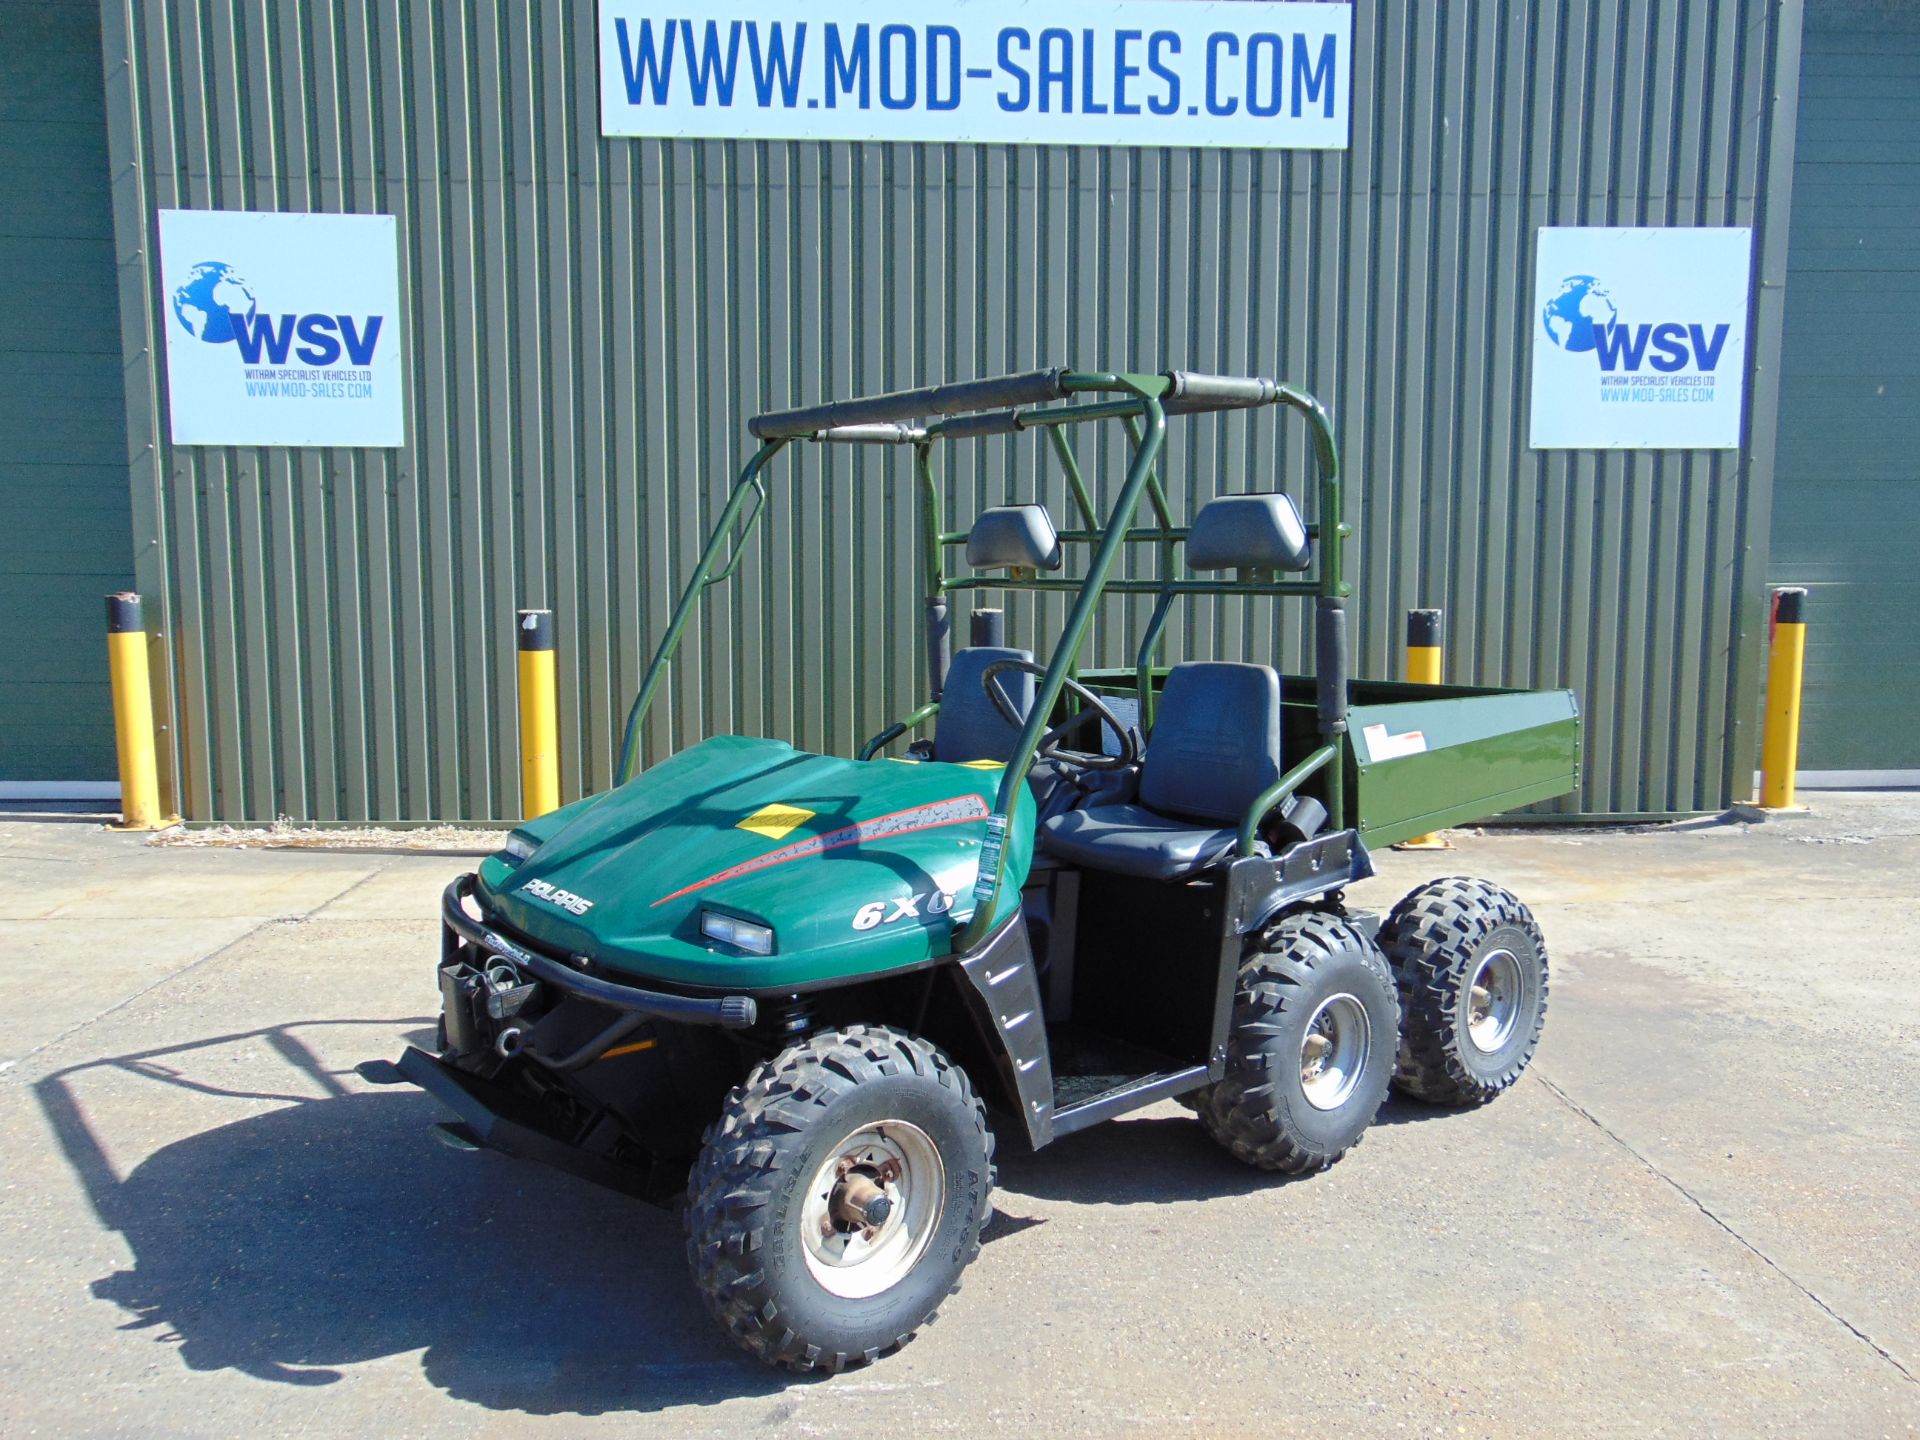 Polaris 6x6 Ranger Utility Vehicle Only 226 Hours! From National Grid. - Image 27 of 27